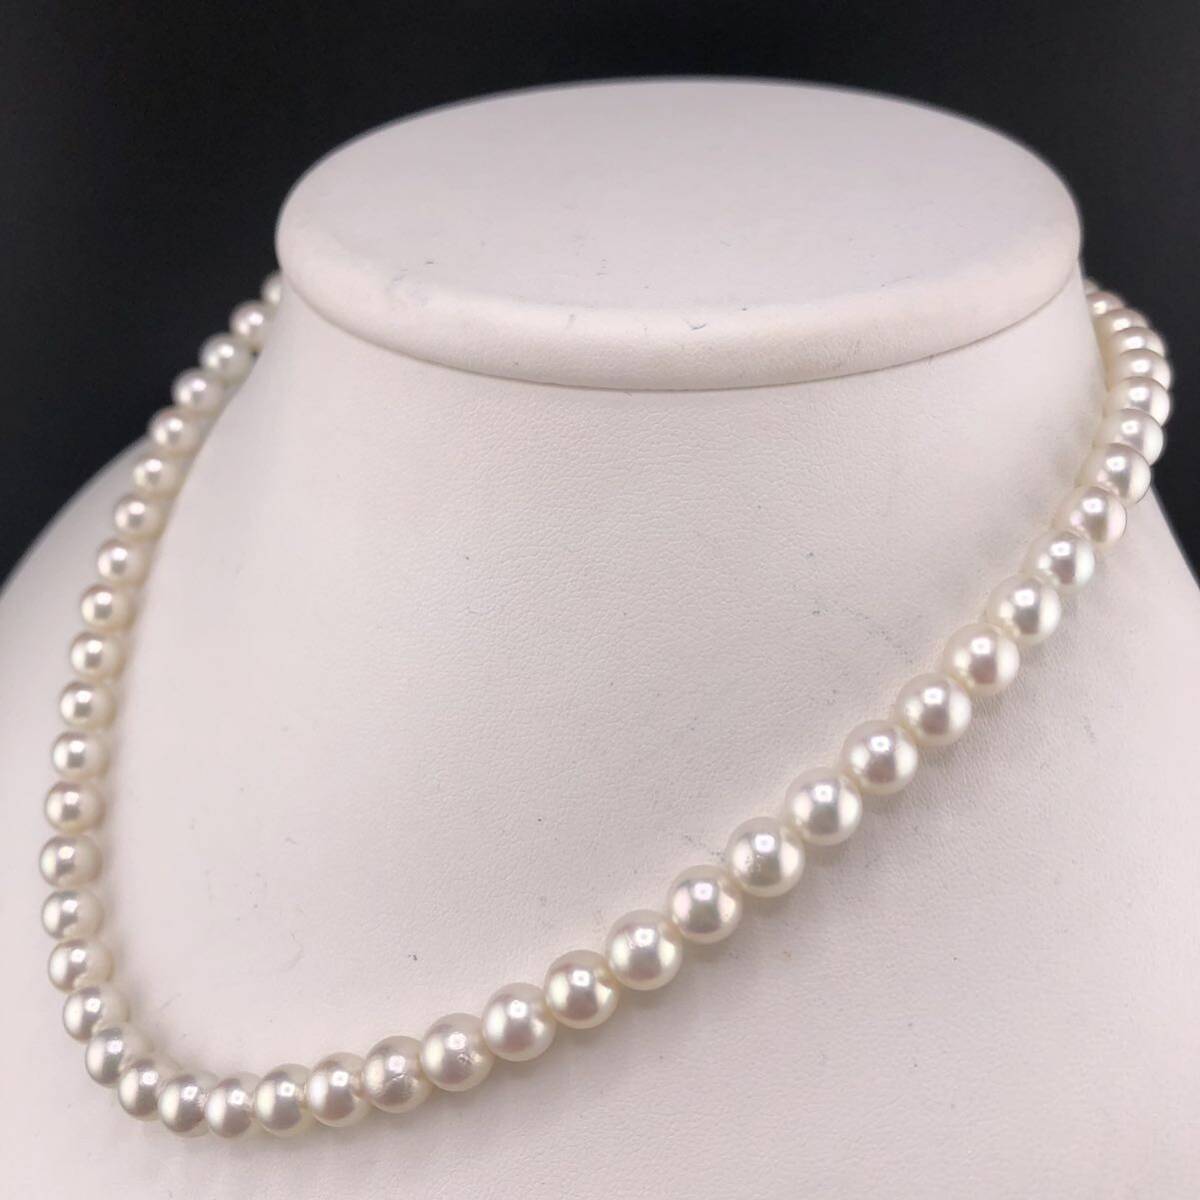 E05-6012 アコヤパールネックレス 6.5mm~7.0mm 40cm 29.3g ( アコヤ真珠 Pearl necklace SILVER )_画像2